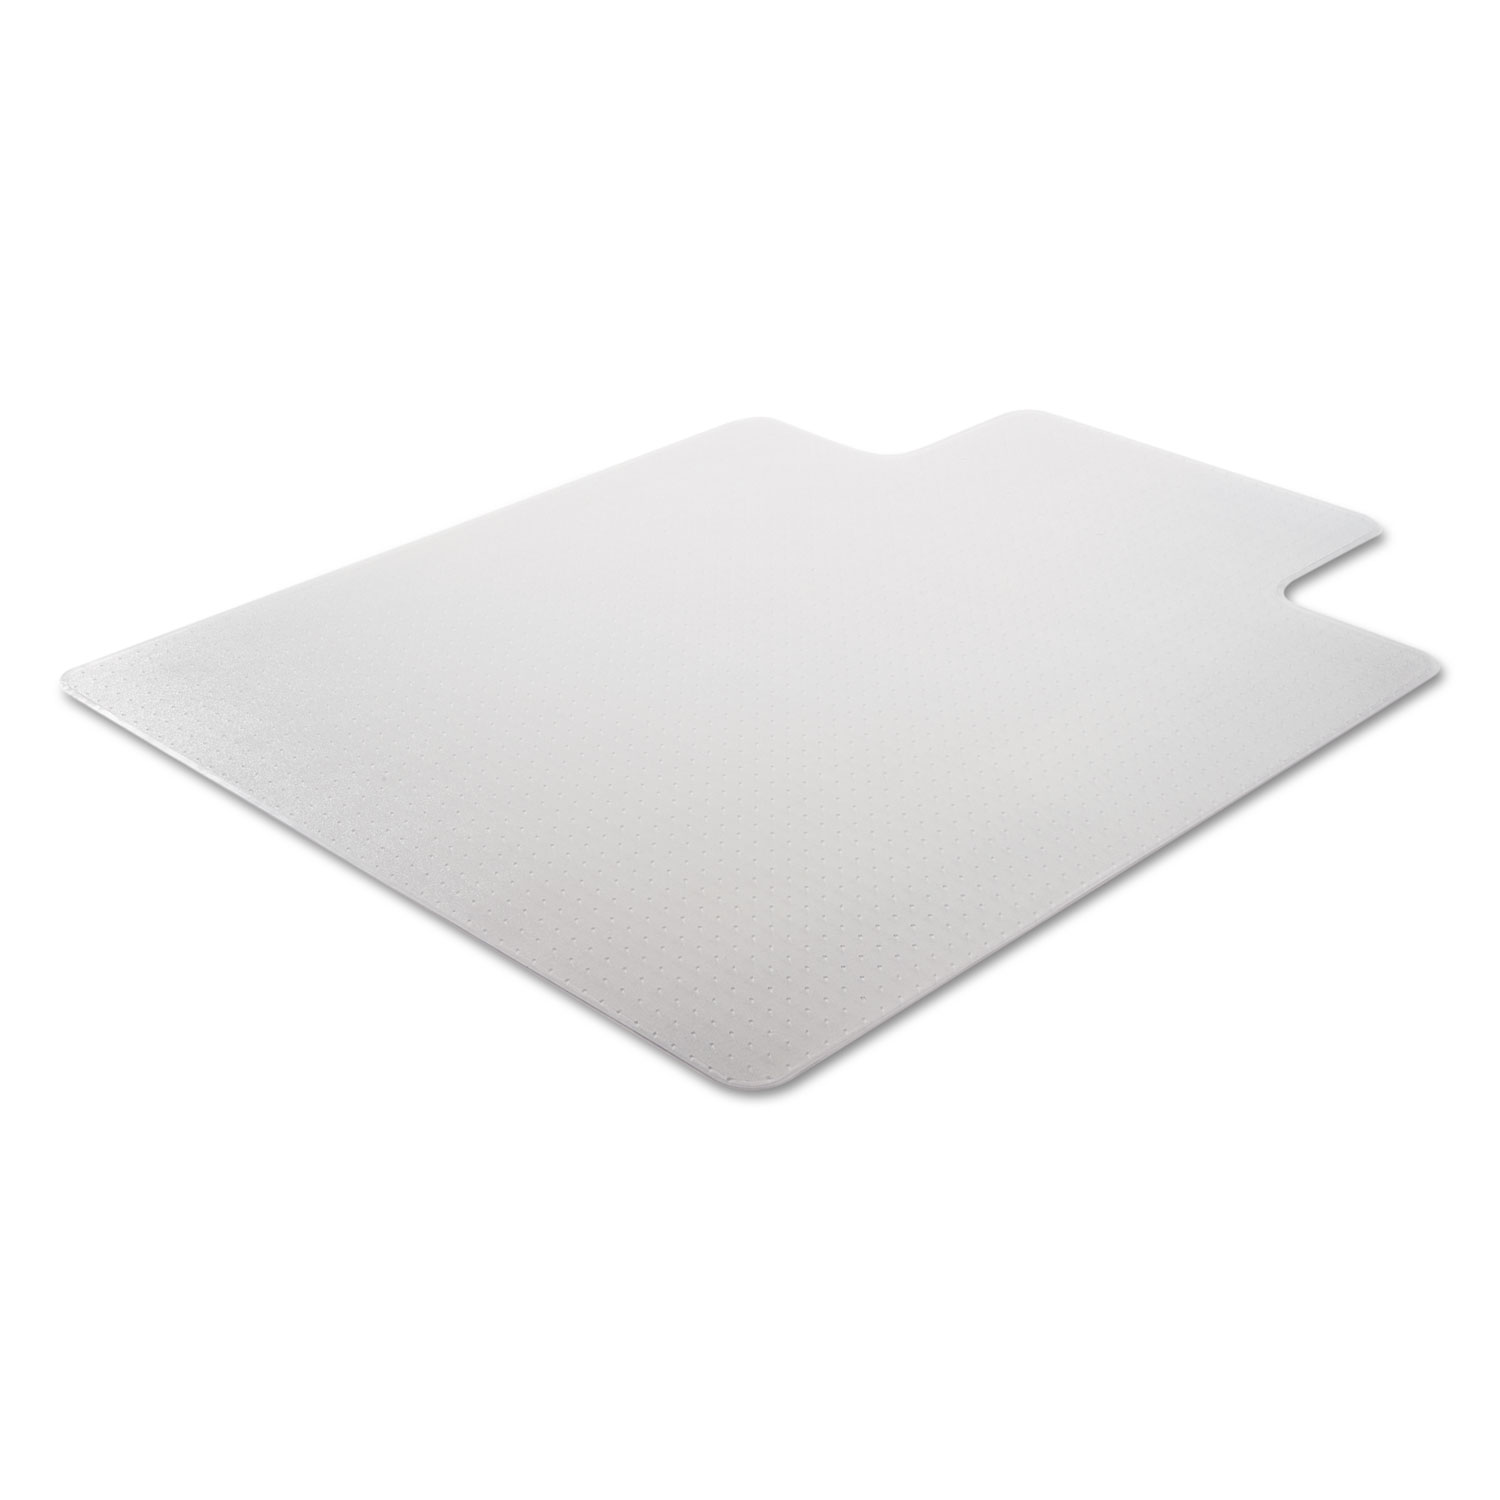 Cleated Chair Mat for Low and Medium Pile Carpet, 36 x 48, Clear